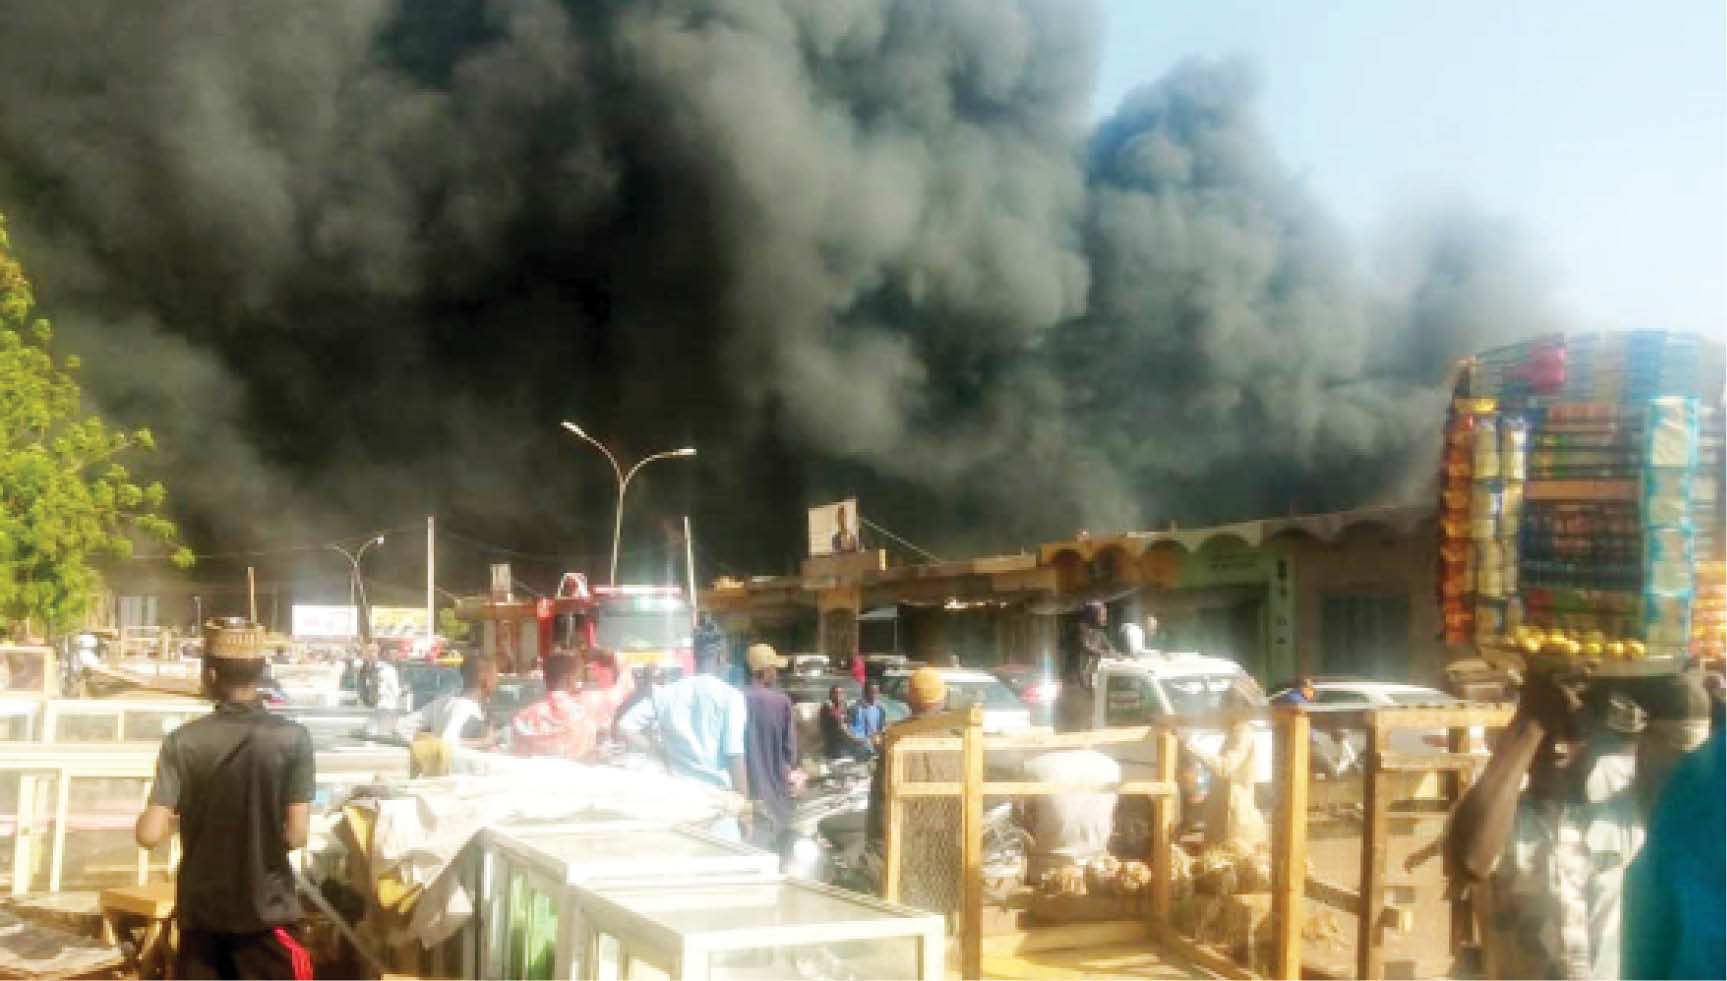 Scene of Sokoto Central Market fire incident yesterday